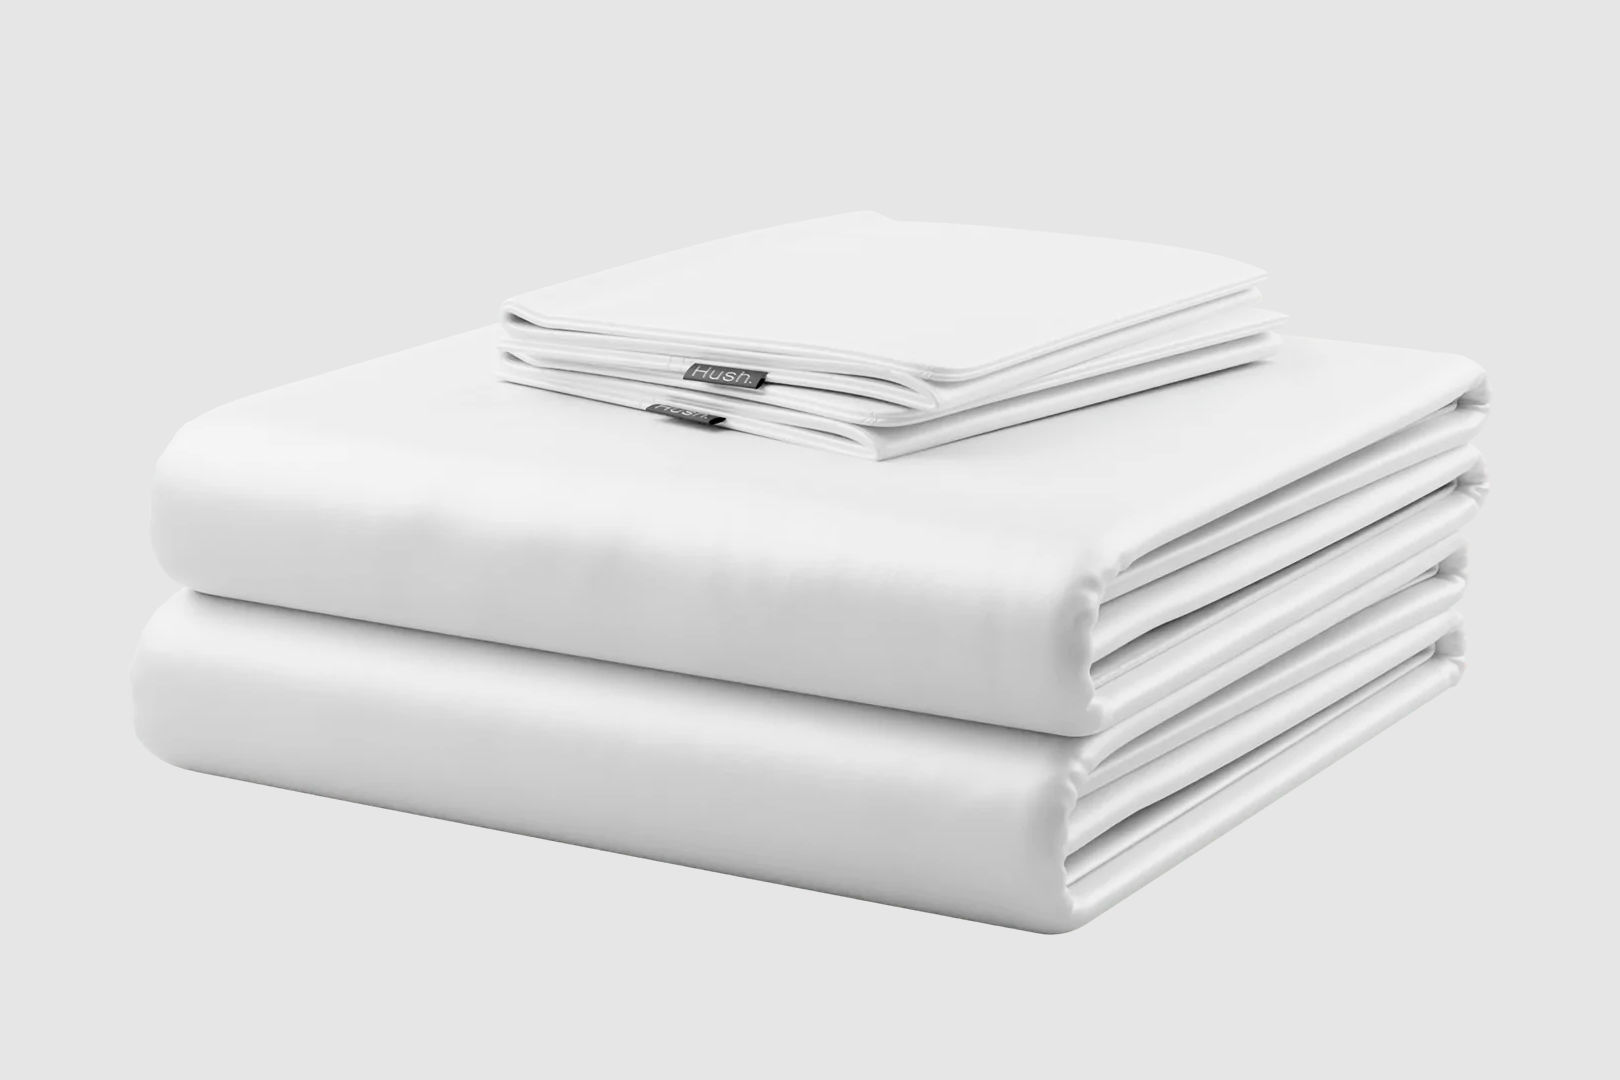 A set of white Hush cooling sheets and pillowcases neatly folded on a white background.